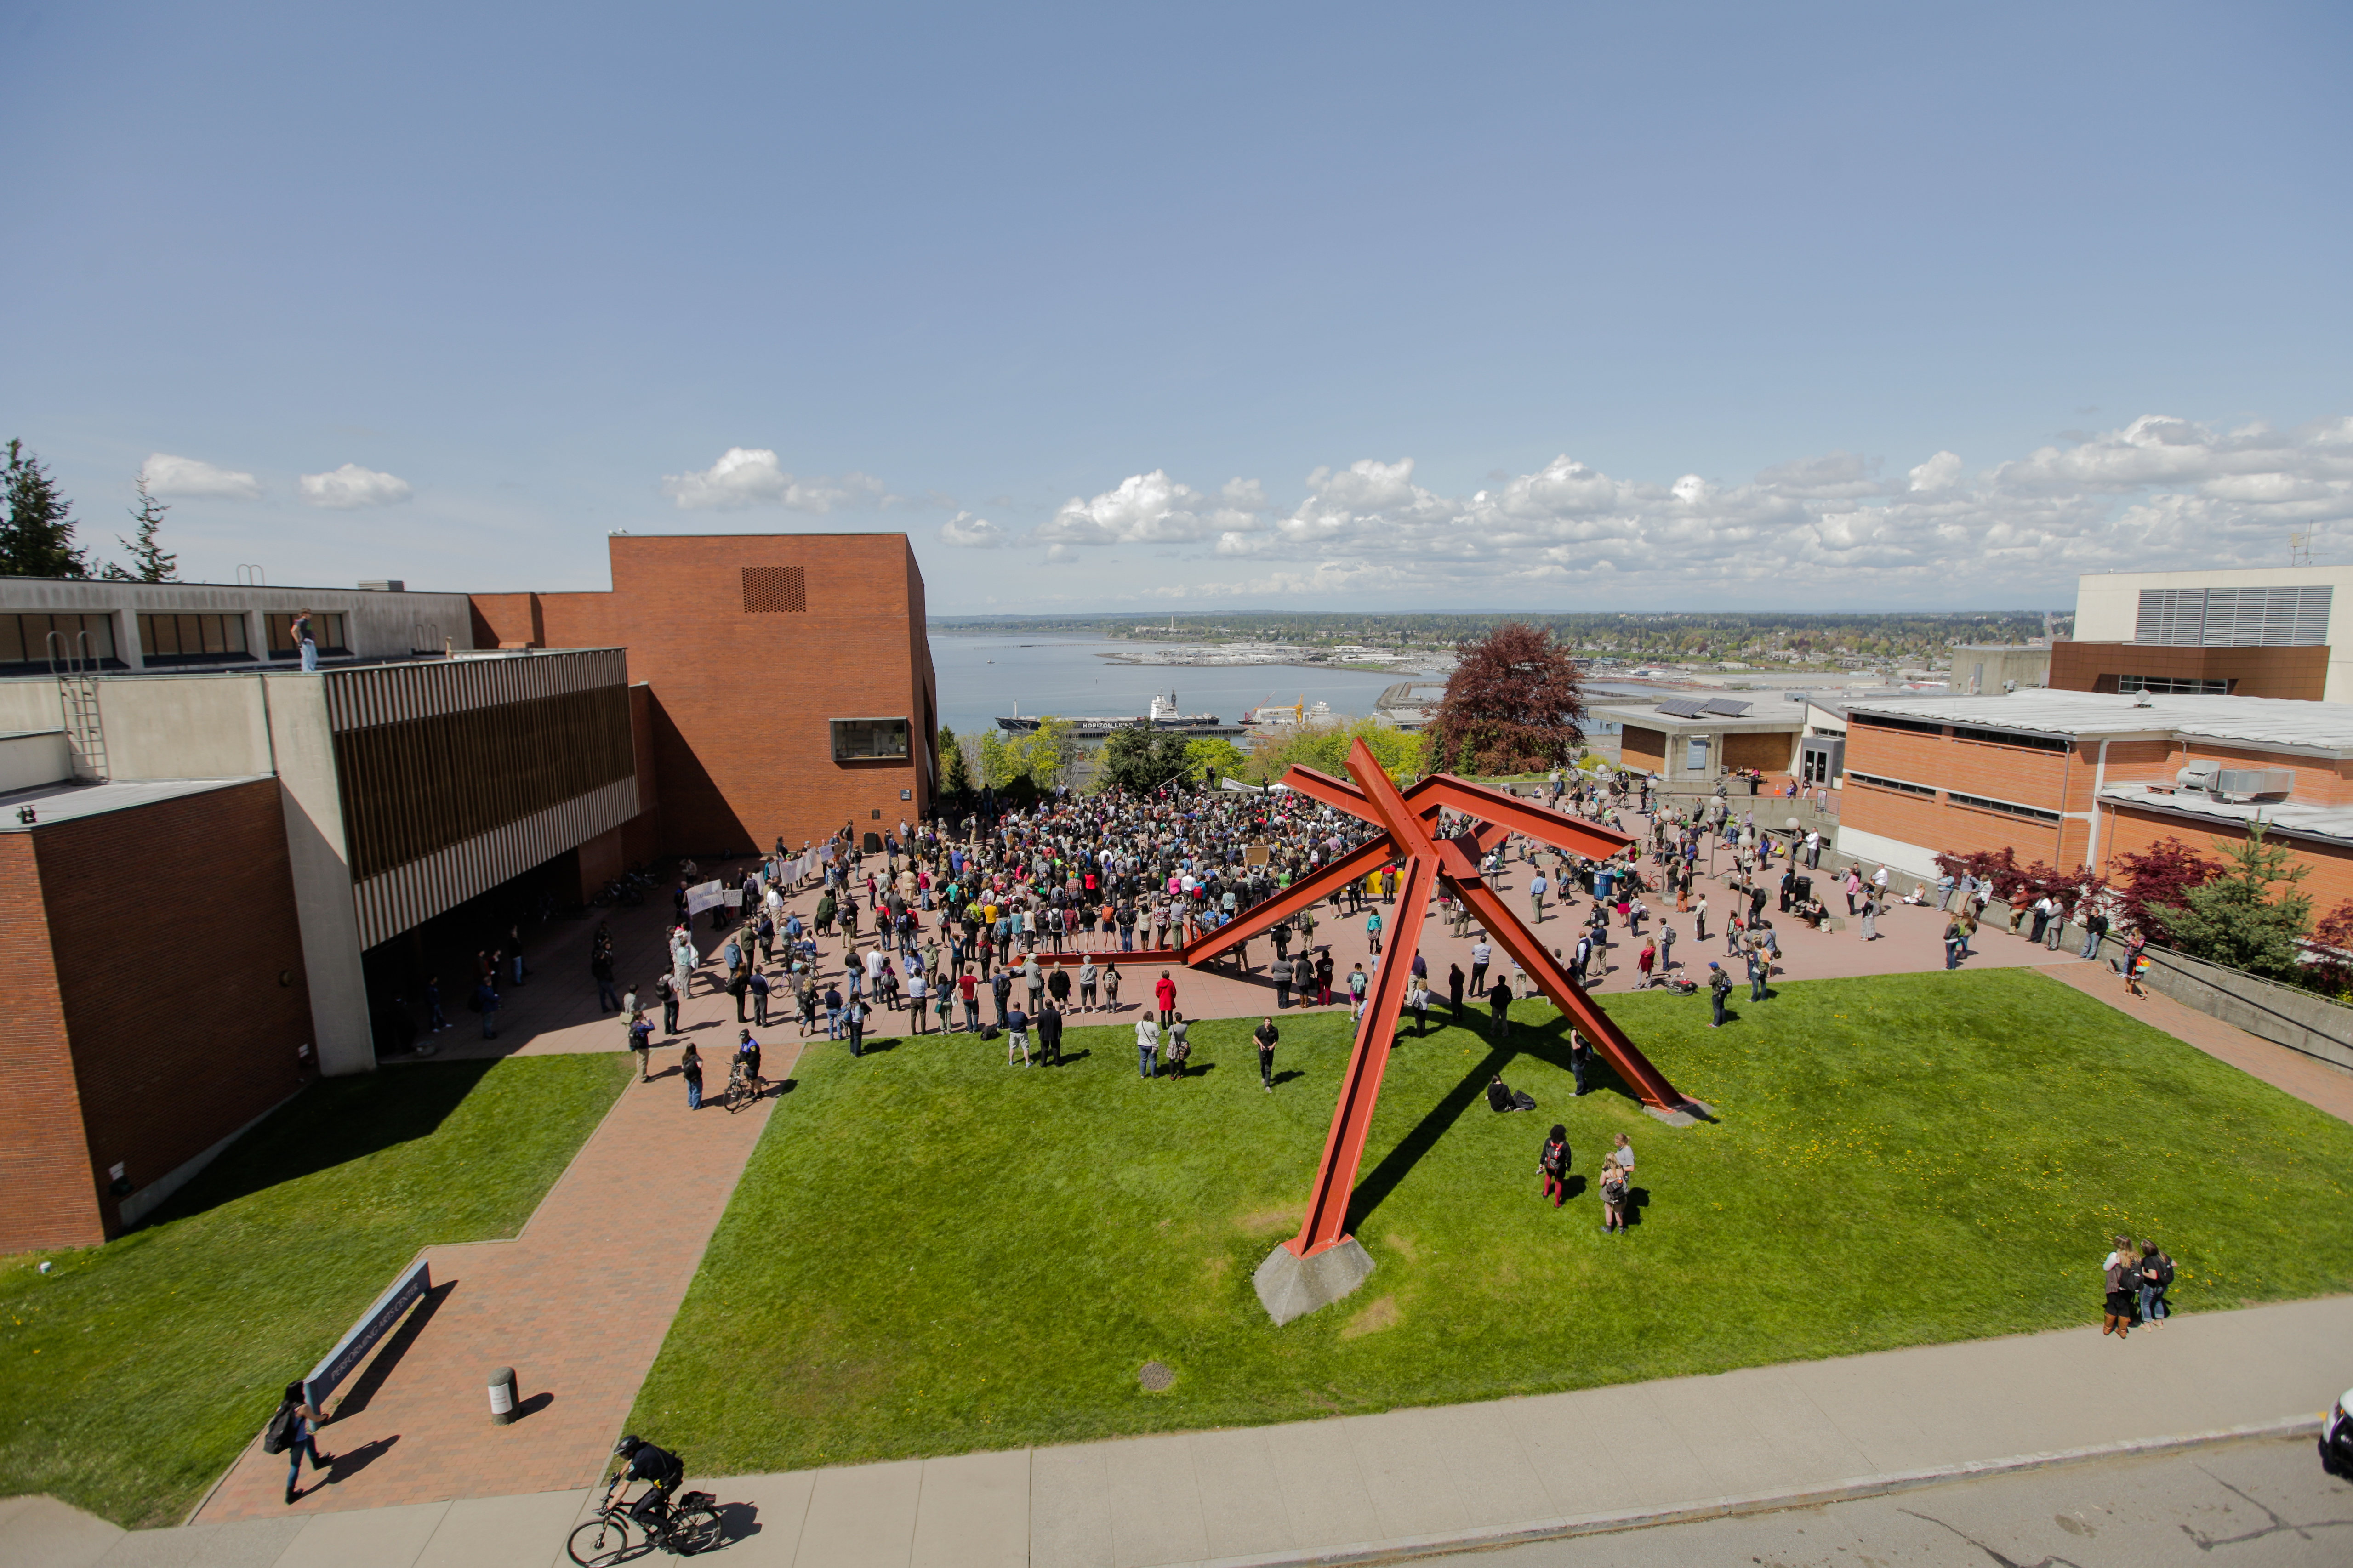 A crowd gathered on the WWU PAC plaza, overlooking the bay on a sunny day